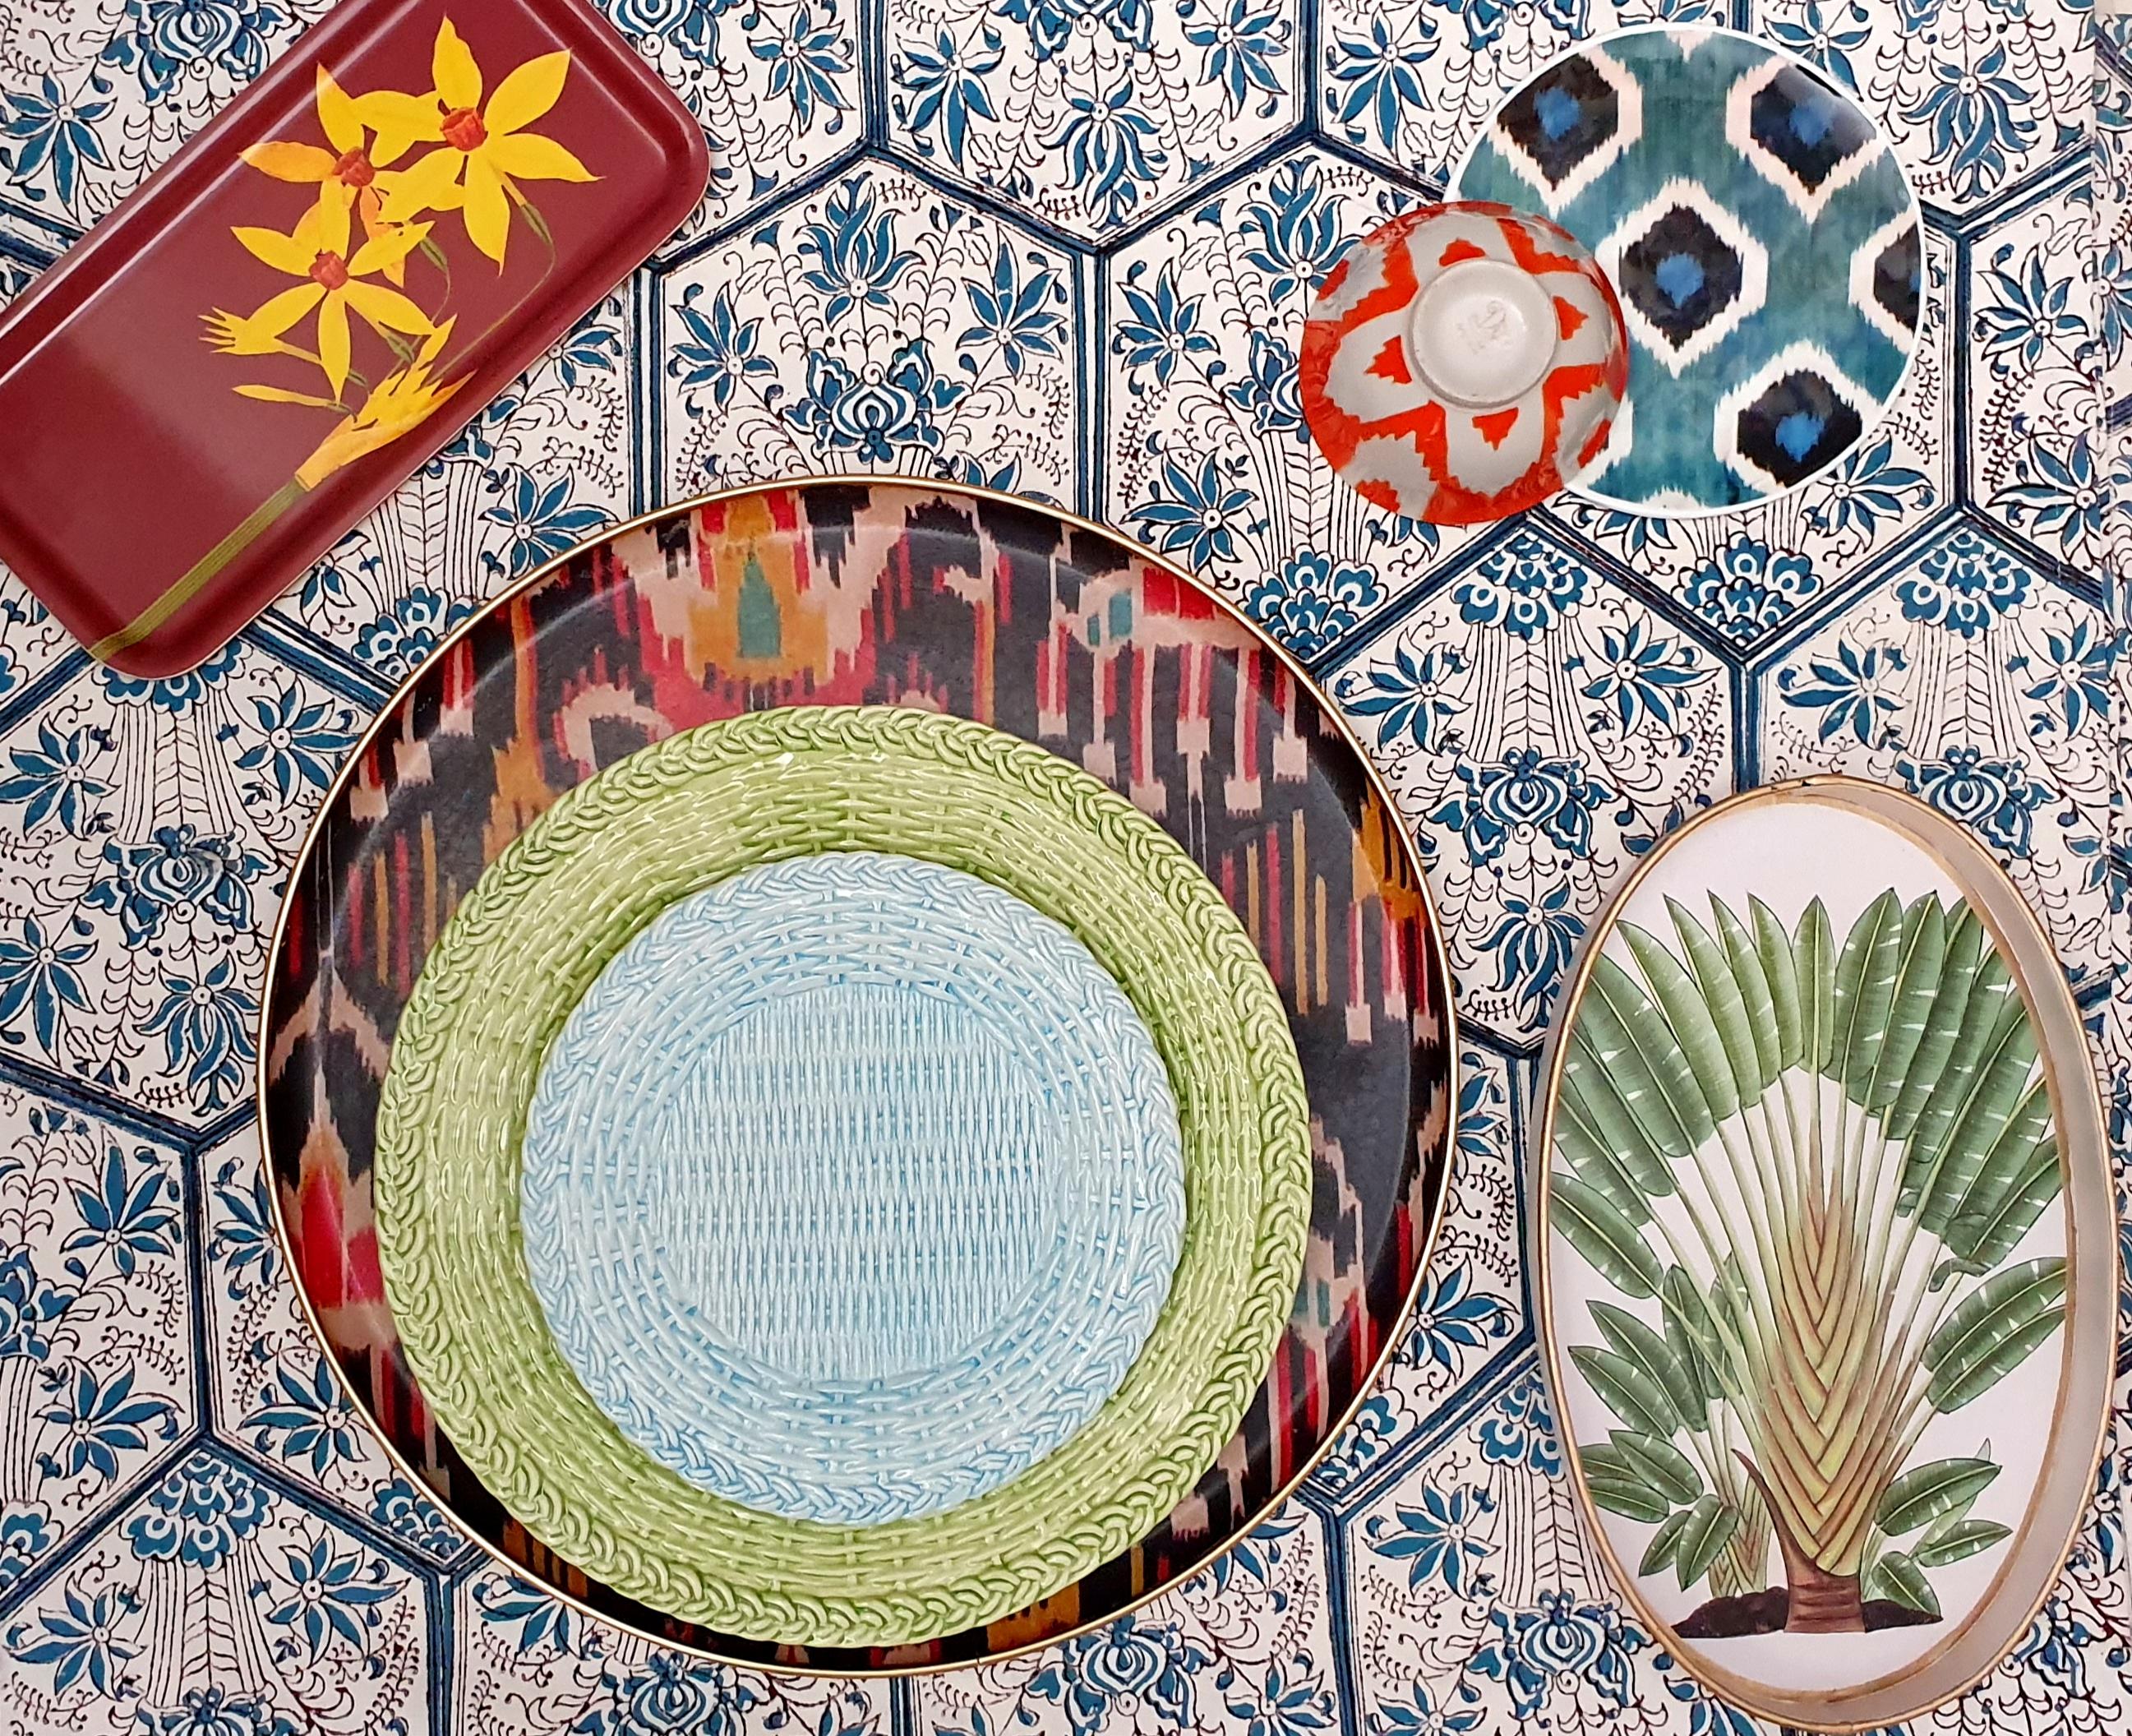 Blue as the skies and nice as the gardens that give the name to this collection
This handmade and hand painted plate reproducts the rattan plates used for picnic and outdoor lunches
Made in italy.